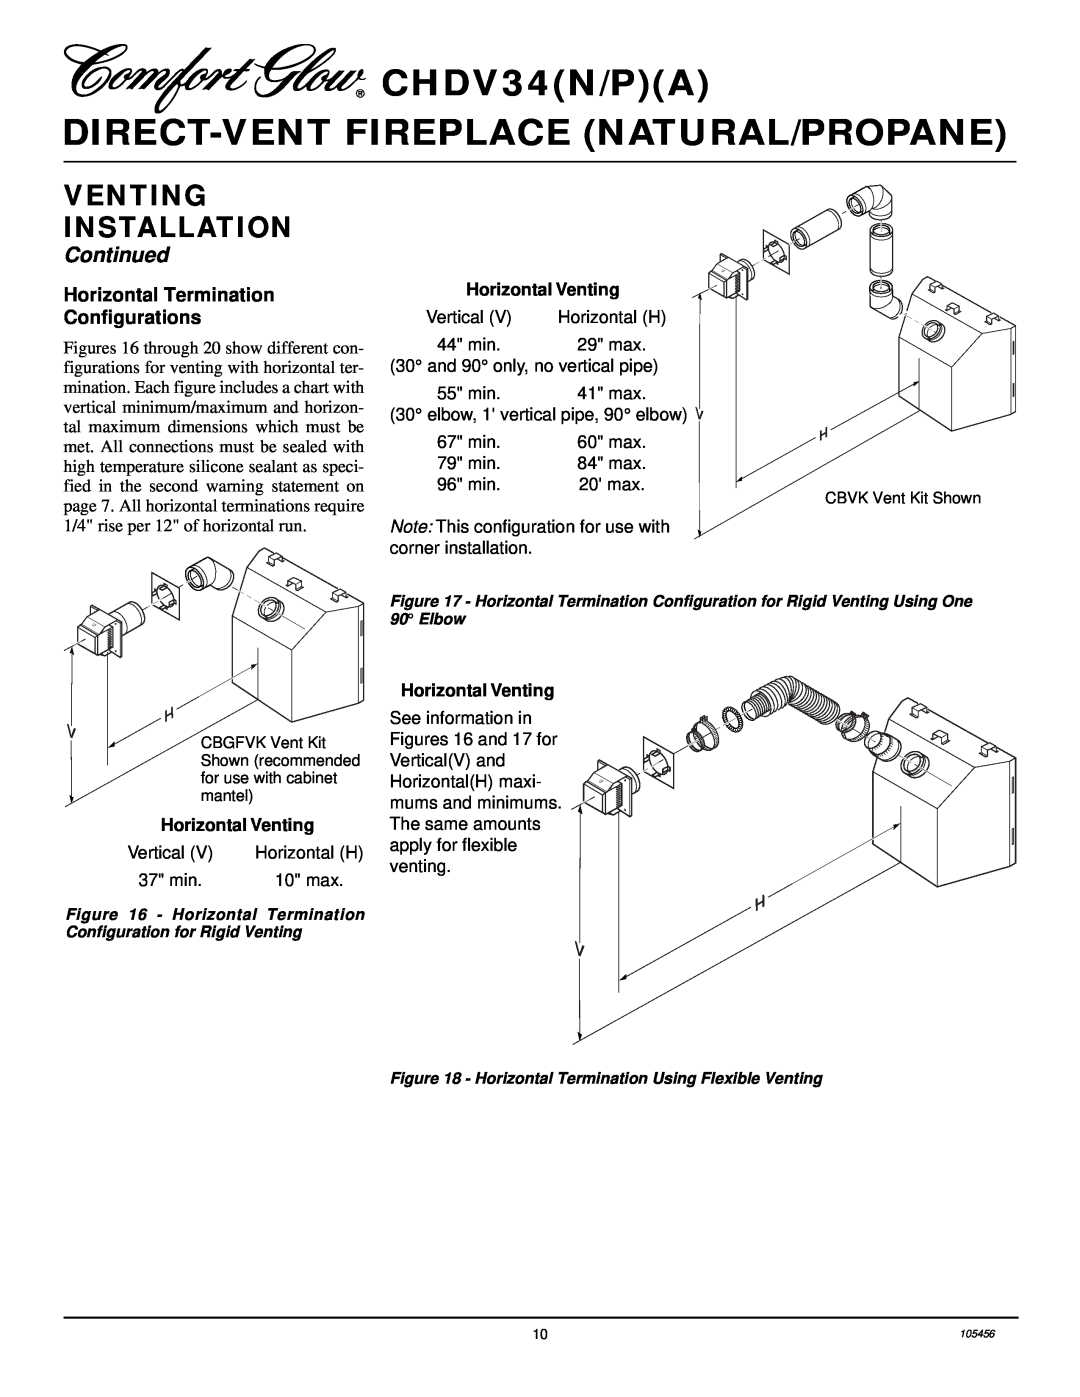 Desa CHDV34(N/P)(A) Horizontal Termination Configurations, CHDV34N/PA DIRECT-VENTFIREPLACE NATURAL/PROPANE, Continued 